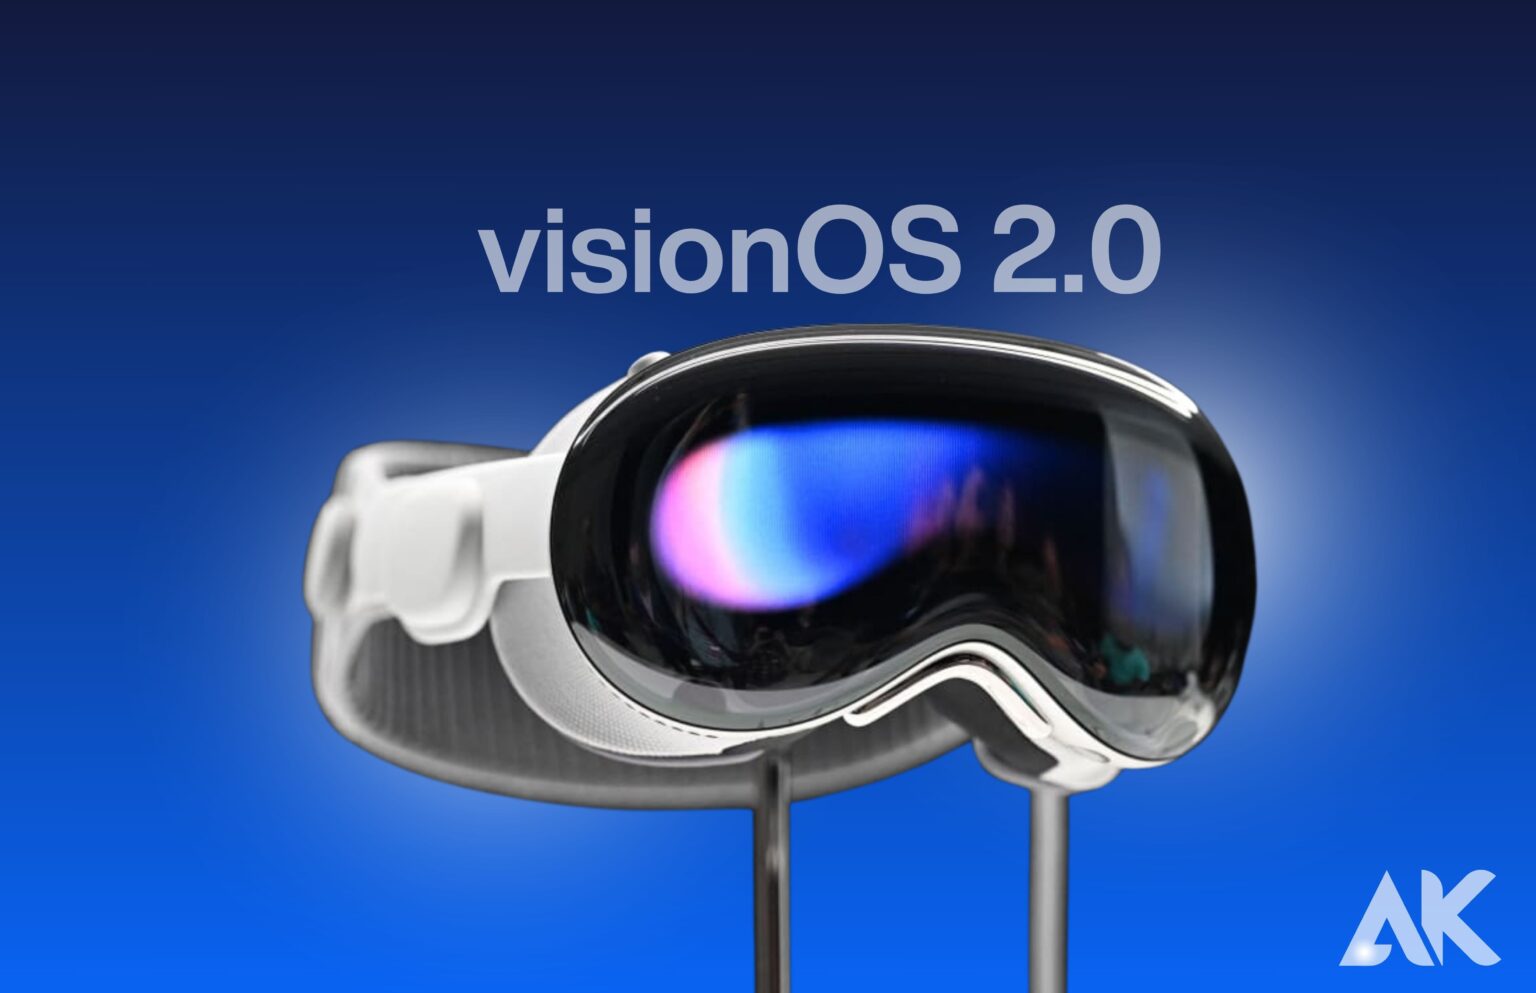 When will it arrive? Predicting the Launch Date of VisionOS 2.0